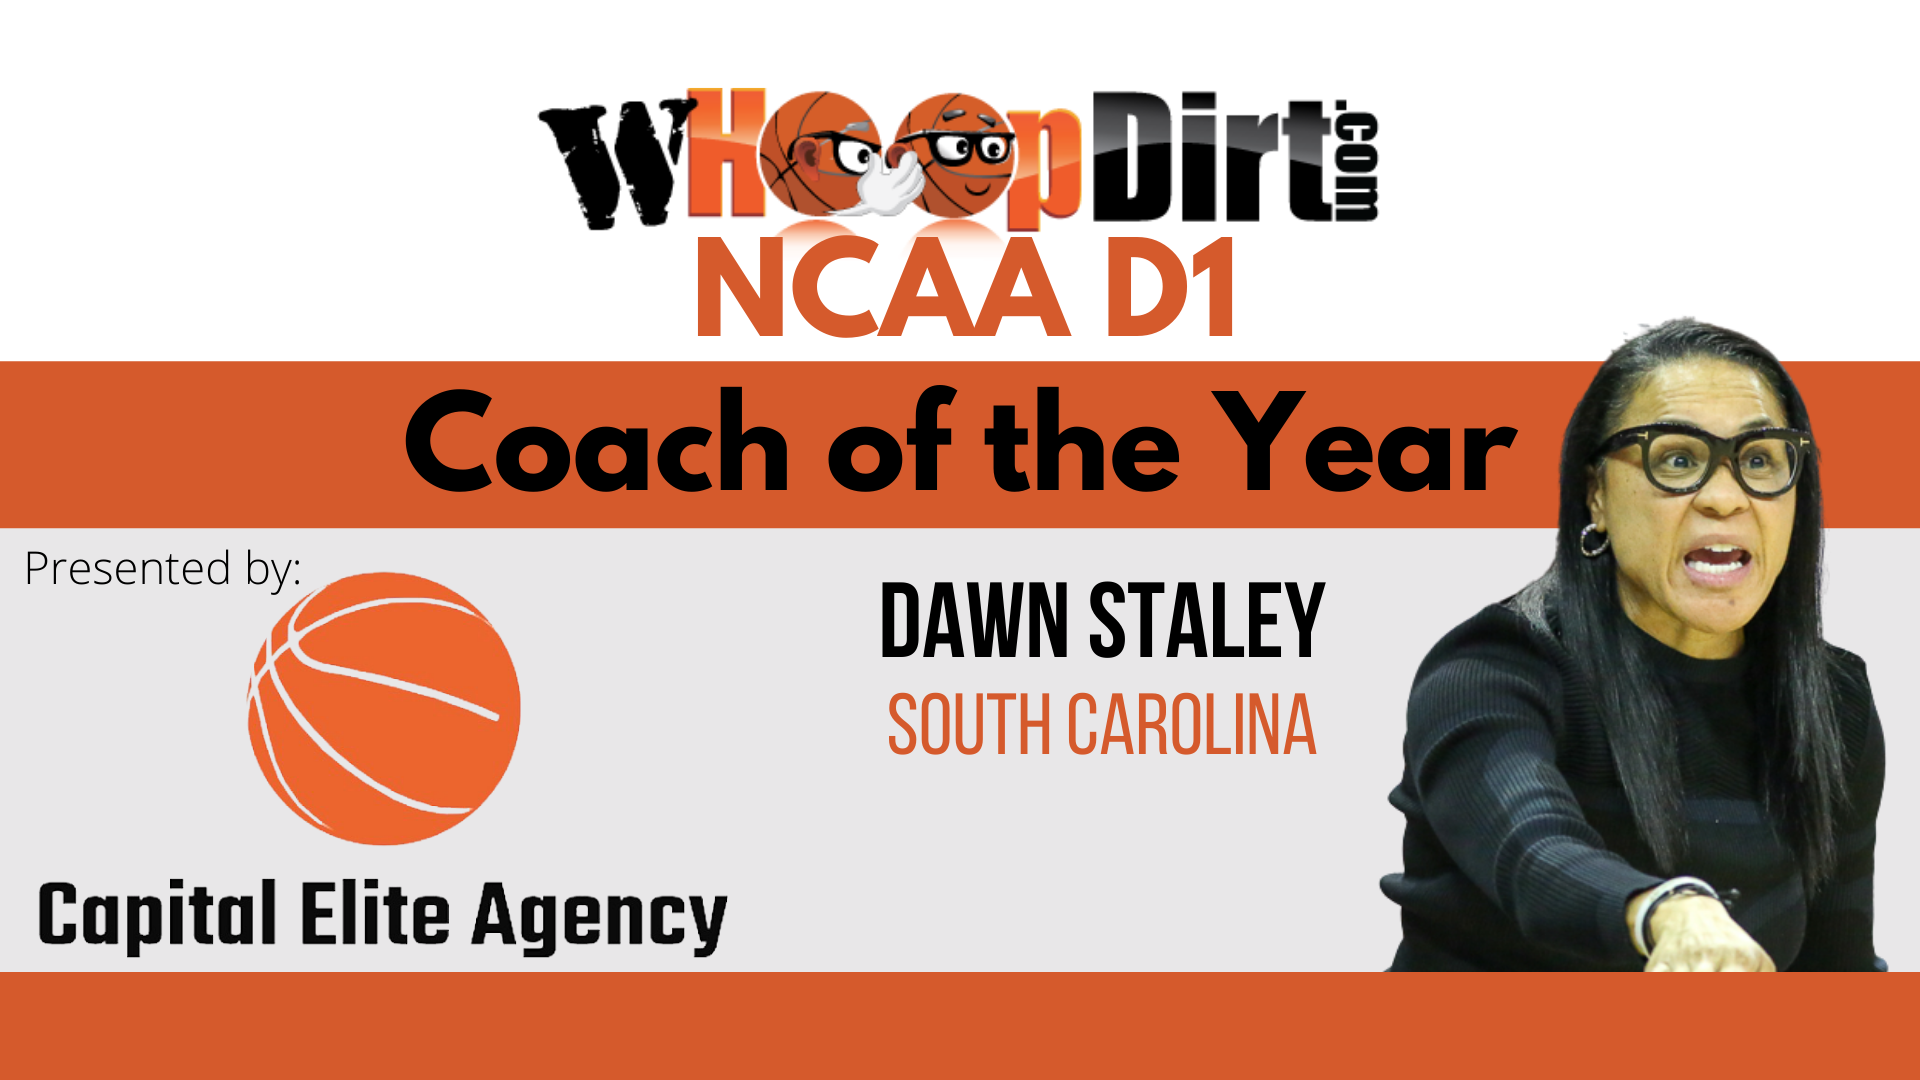 Staley named Naismith Coach of the Year